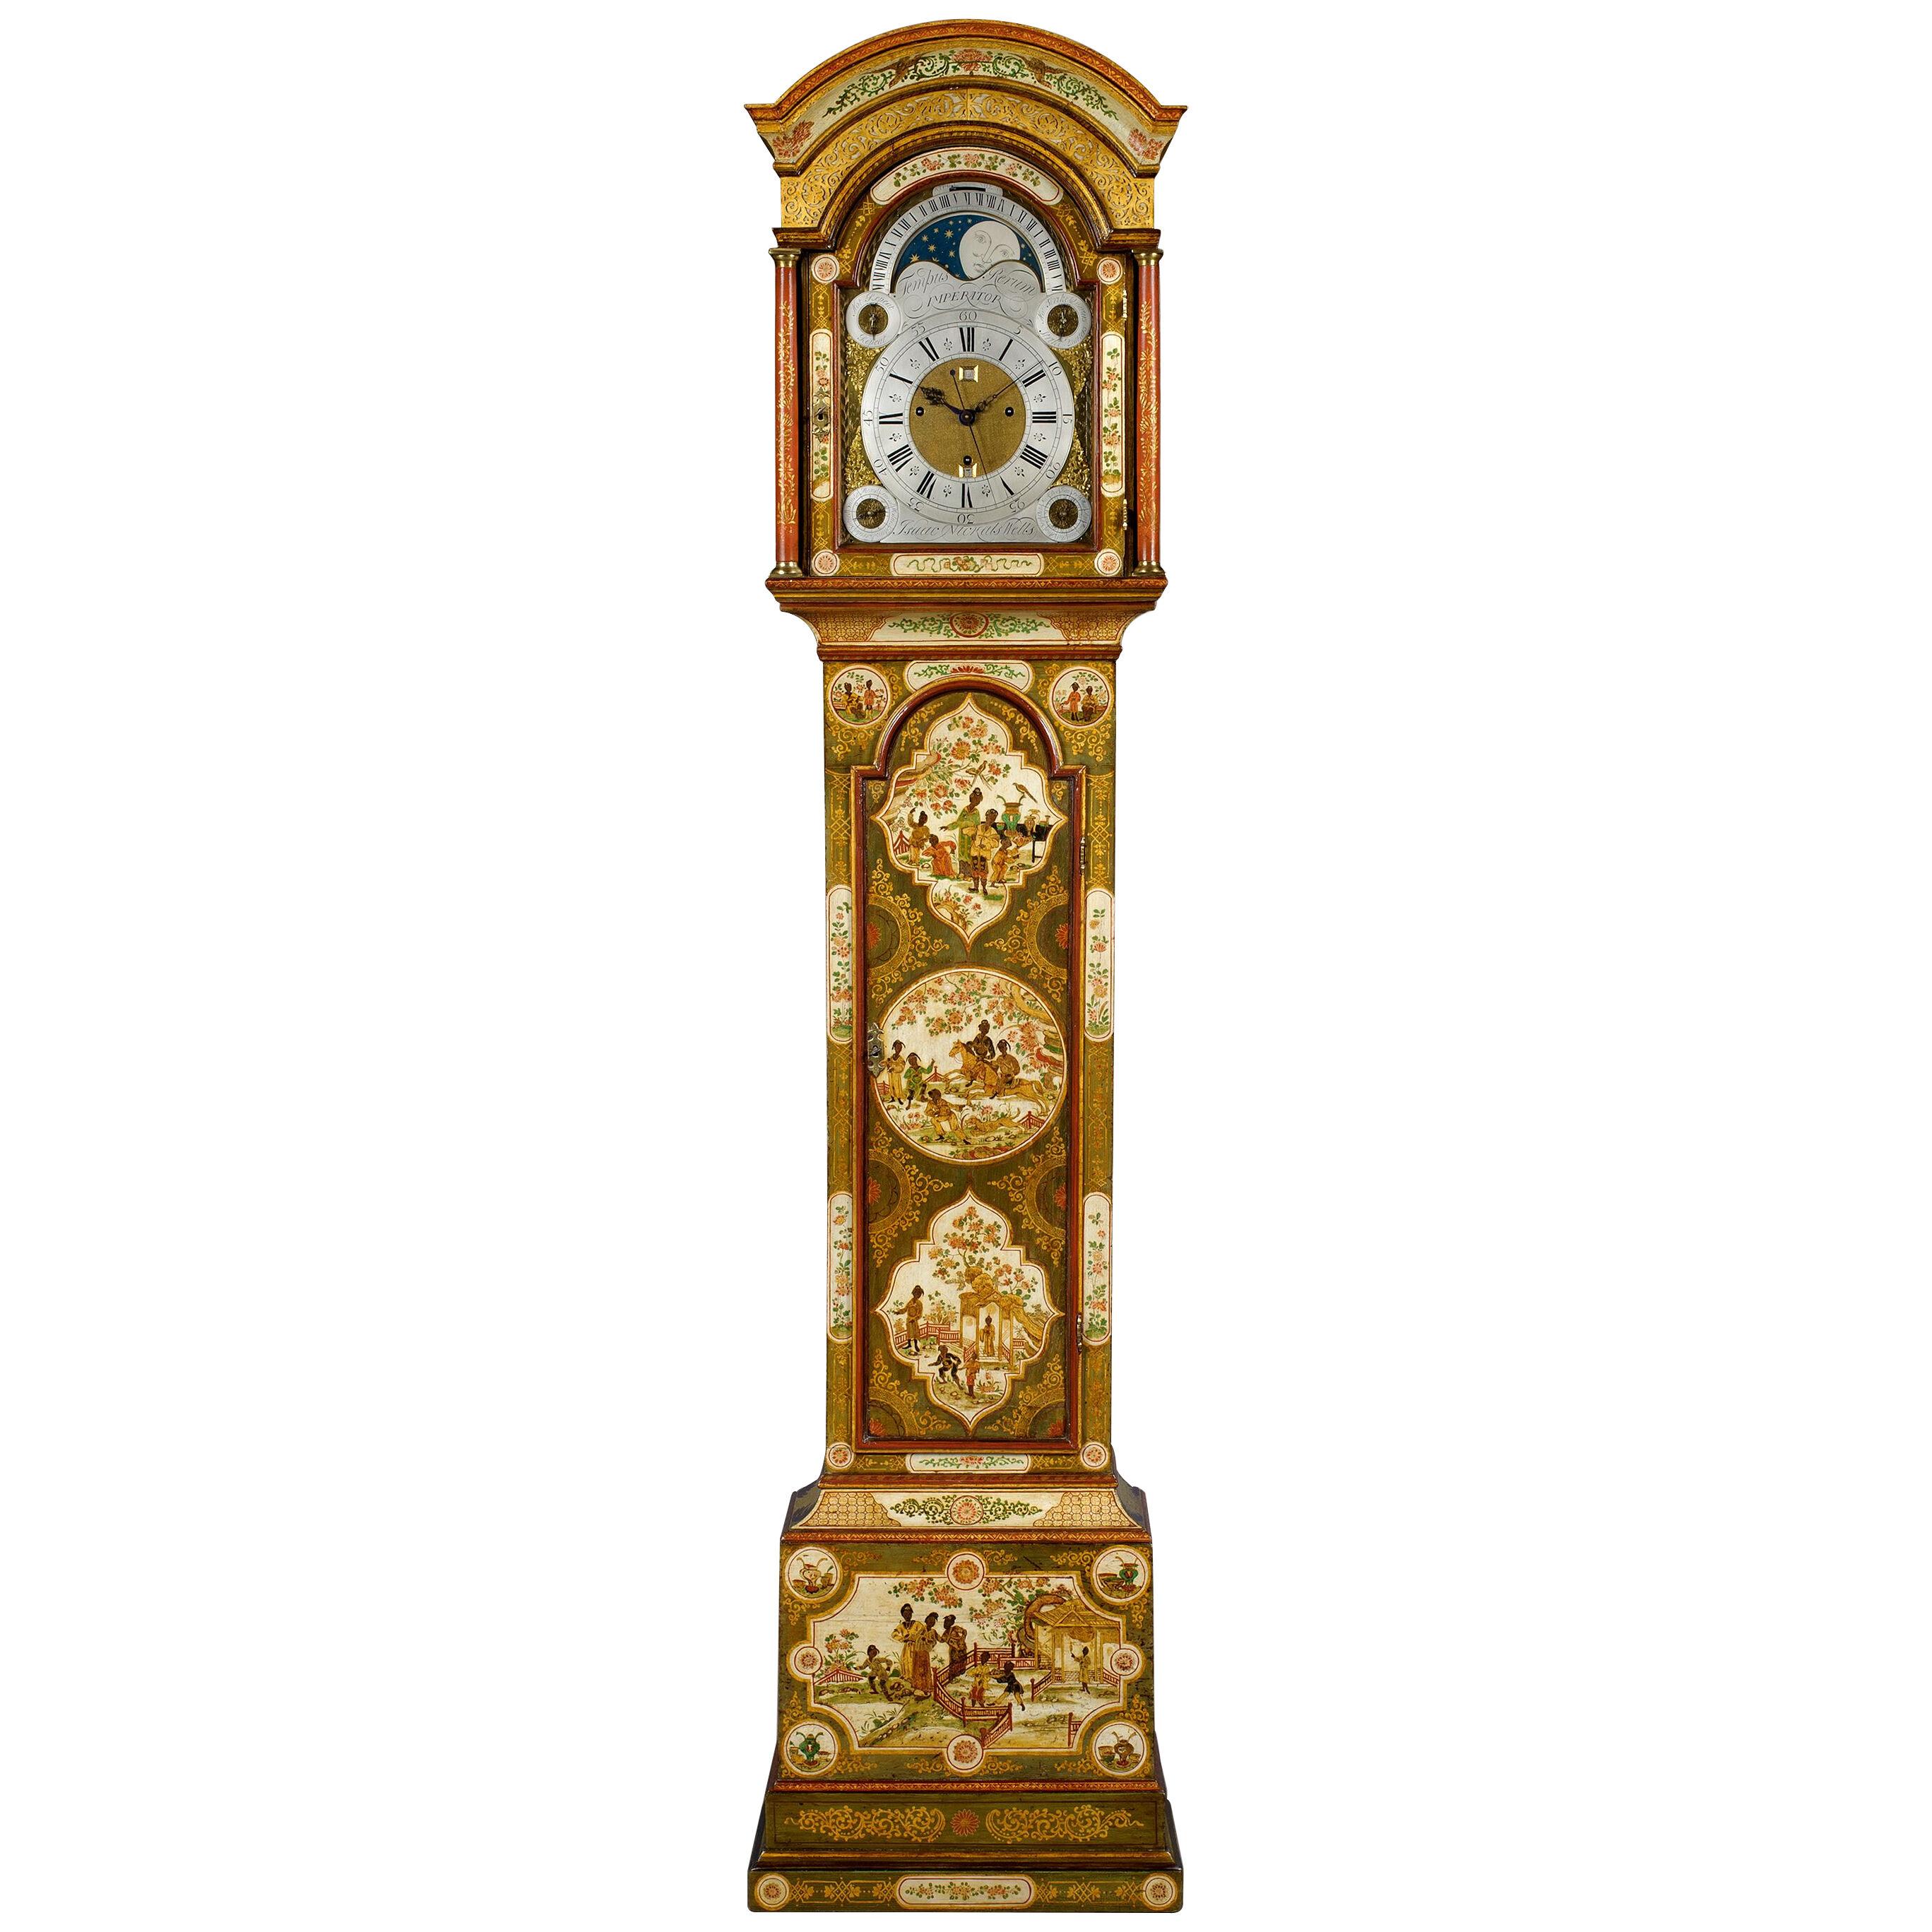 ISAAC NICKALS, WELLS. An important George II cream lacquer longcase clock